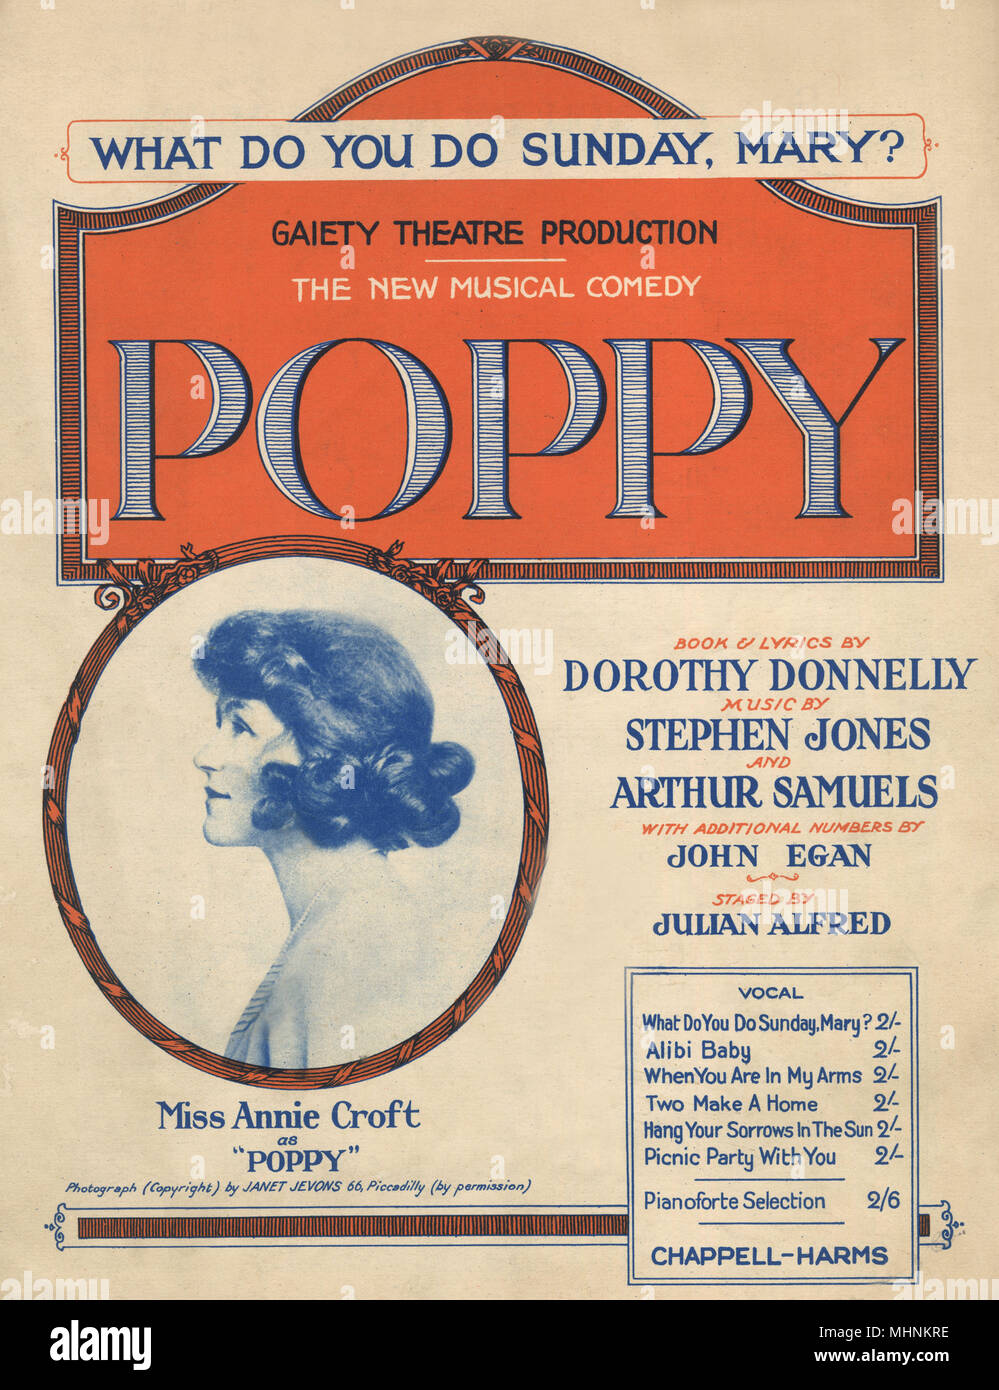 Annie Croft as 'Poppy' - Music Sheet Cover. A Musical Comedy in 3 Acts. Book &amp; lyrics by Dorothy Donnelly: Music by Stephen Jones and Arthur Samuels: Additional numbers by John Egan. 'What do you do Sunday, Mary', Apollo Theatre, Broadway - 13 September, 1923, photo of Miss Annie Croft by Janet Jevons     Date: circa 1923 Stock Photo